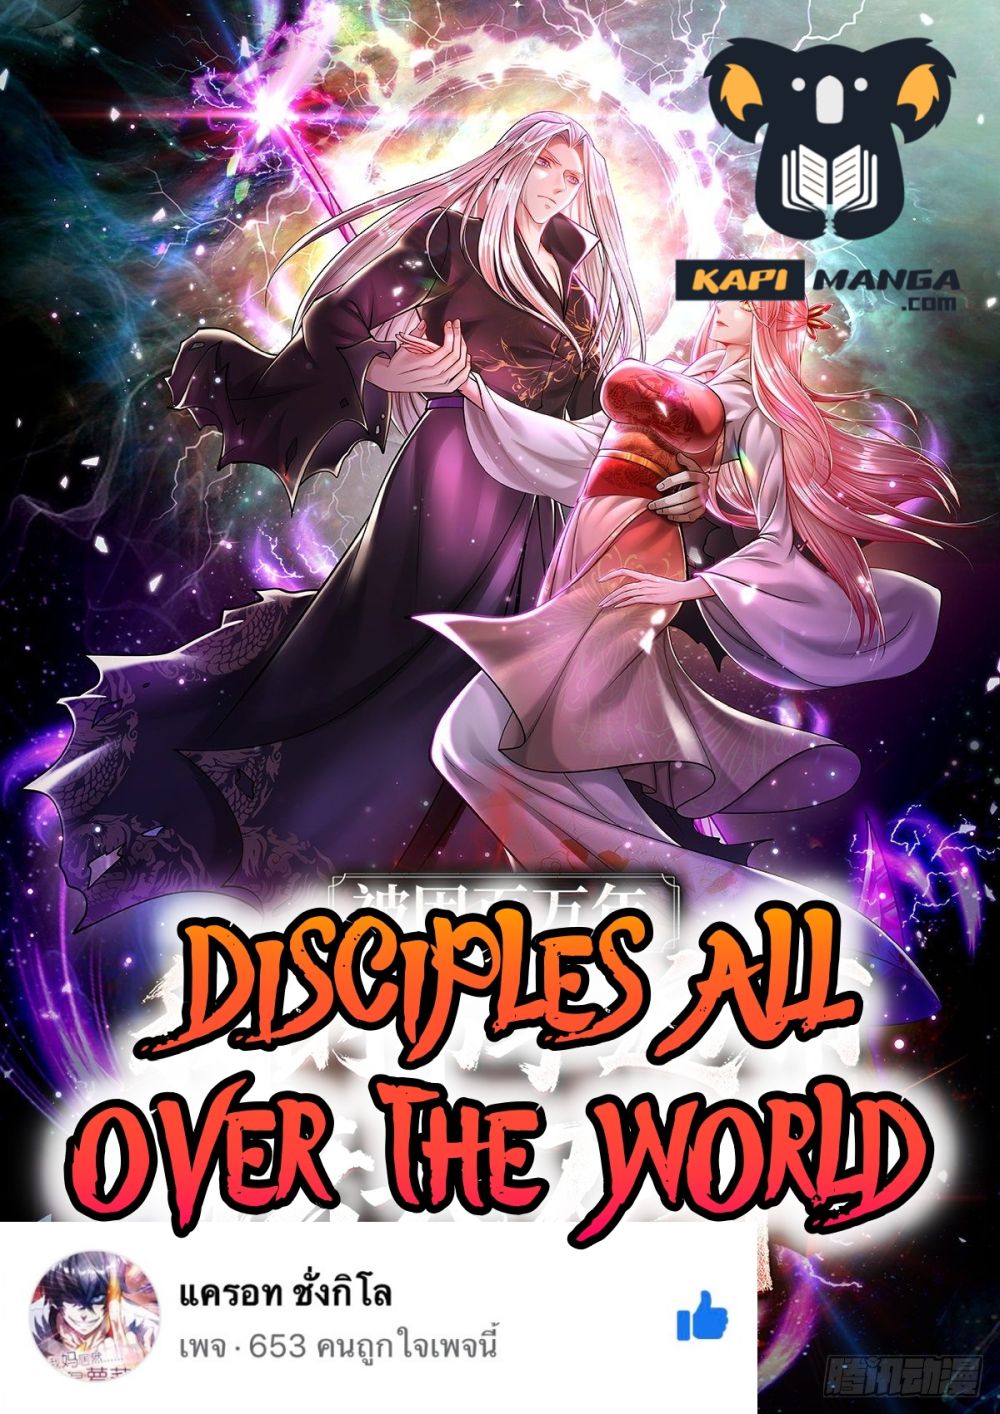 Disciples All Over the World à¸à¸­à¸à¸à¸µà¹ 47 (1)